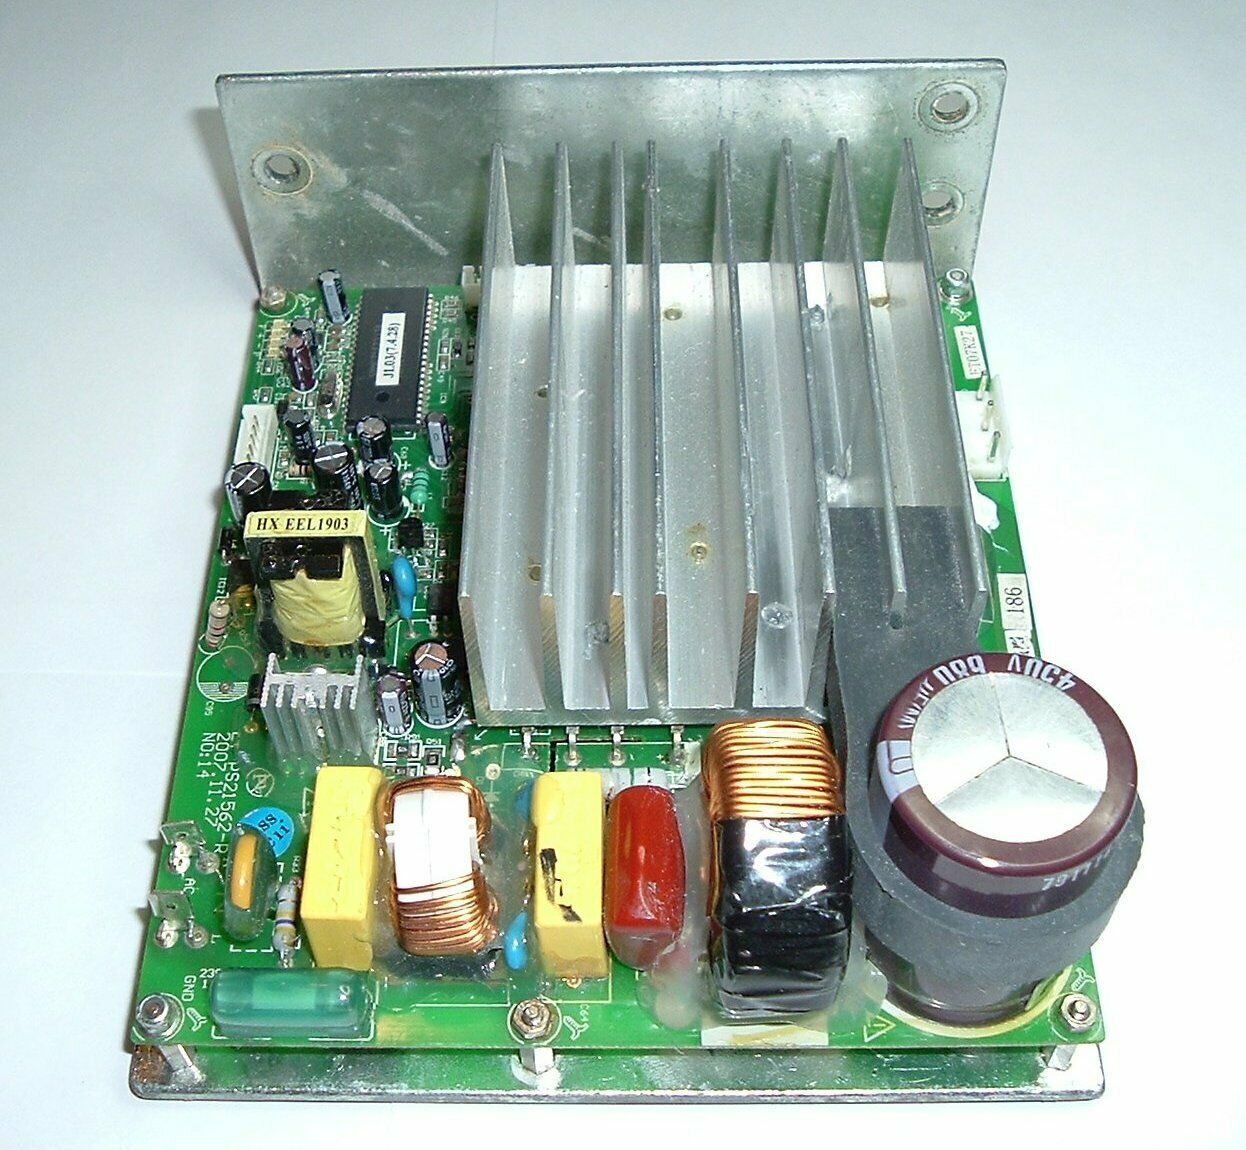 Primary image for Power Plate Pro5 Frequency Inverter Repair-Upgrade 2YrWrty 66000097, ET-PS21562